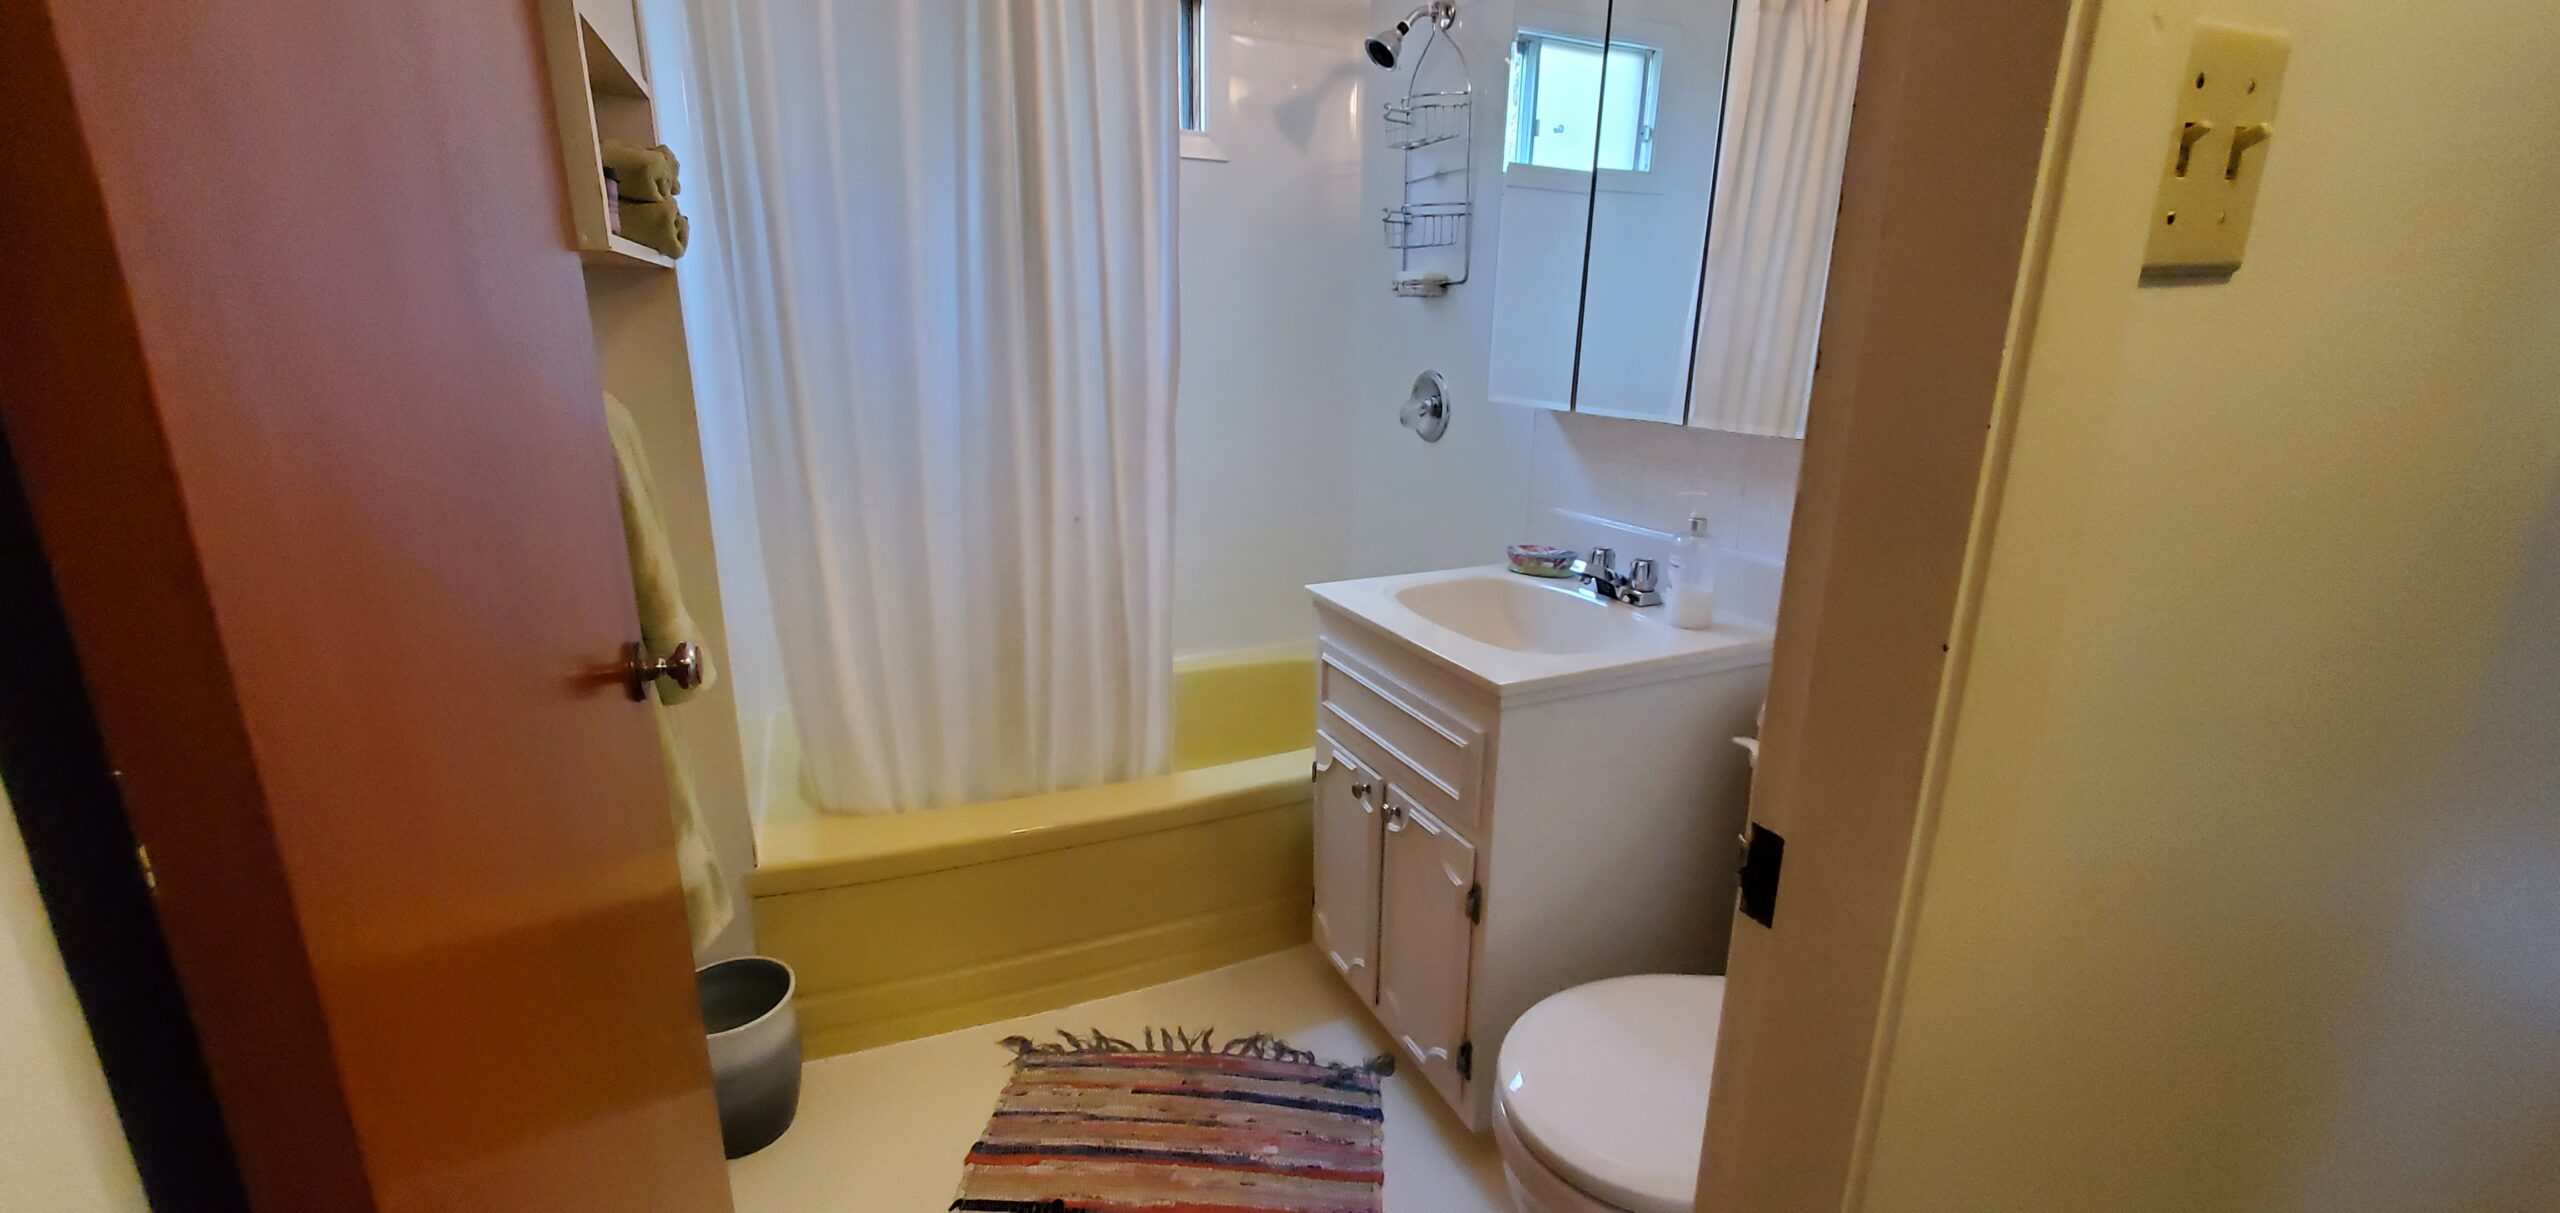 A bathroom with a toilet, a sink, and a shower-tub combo.